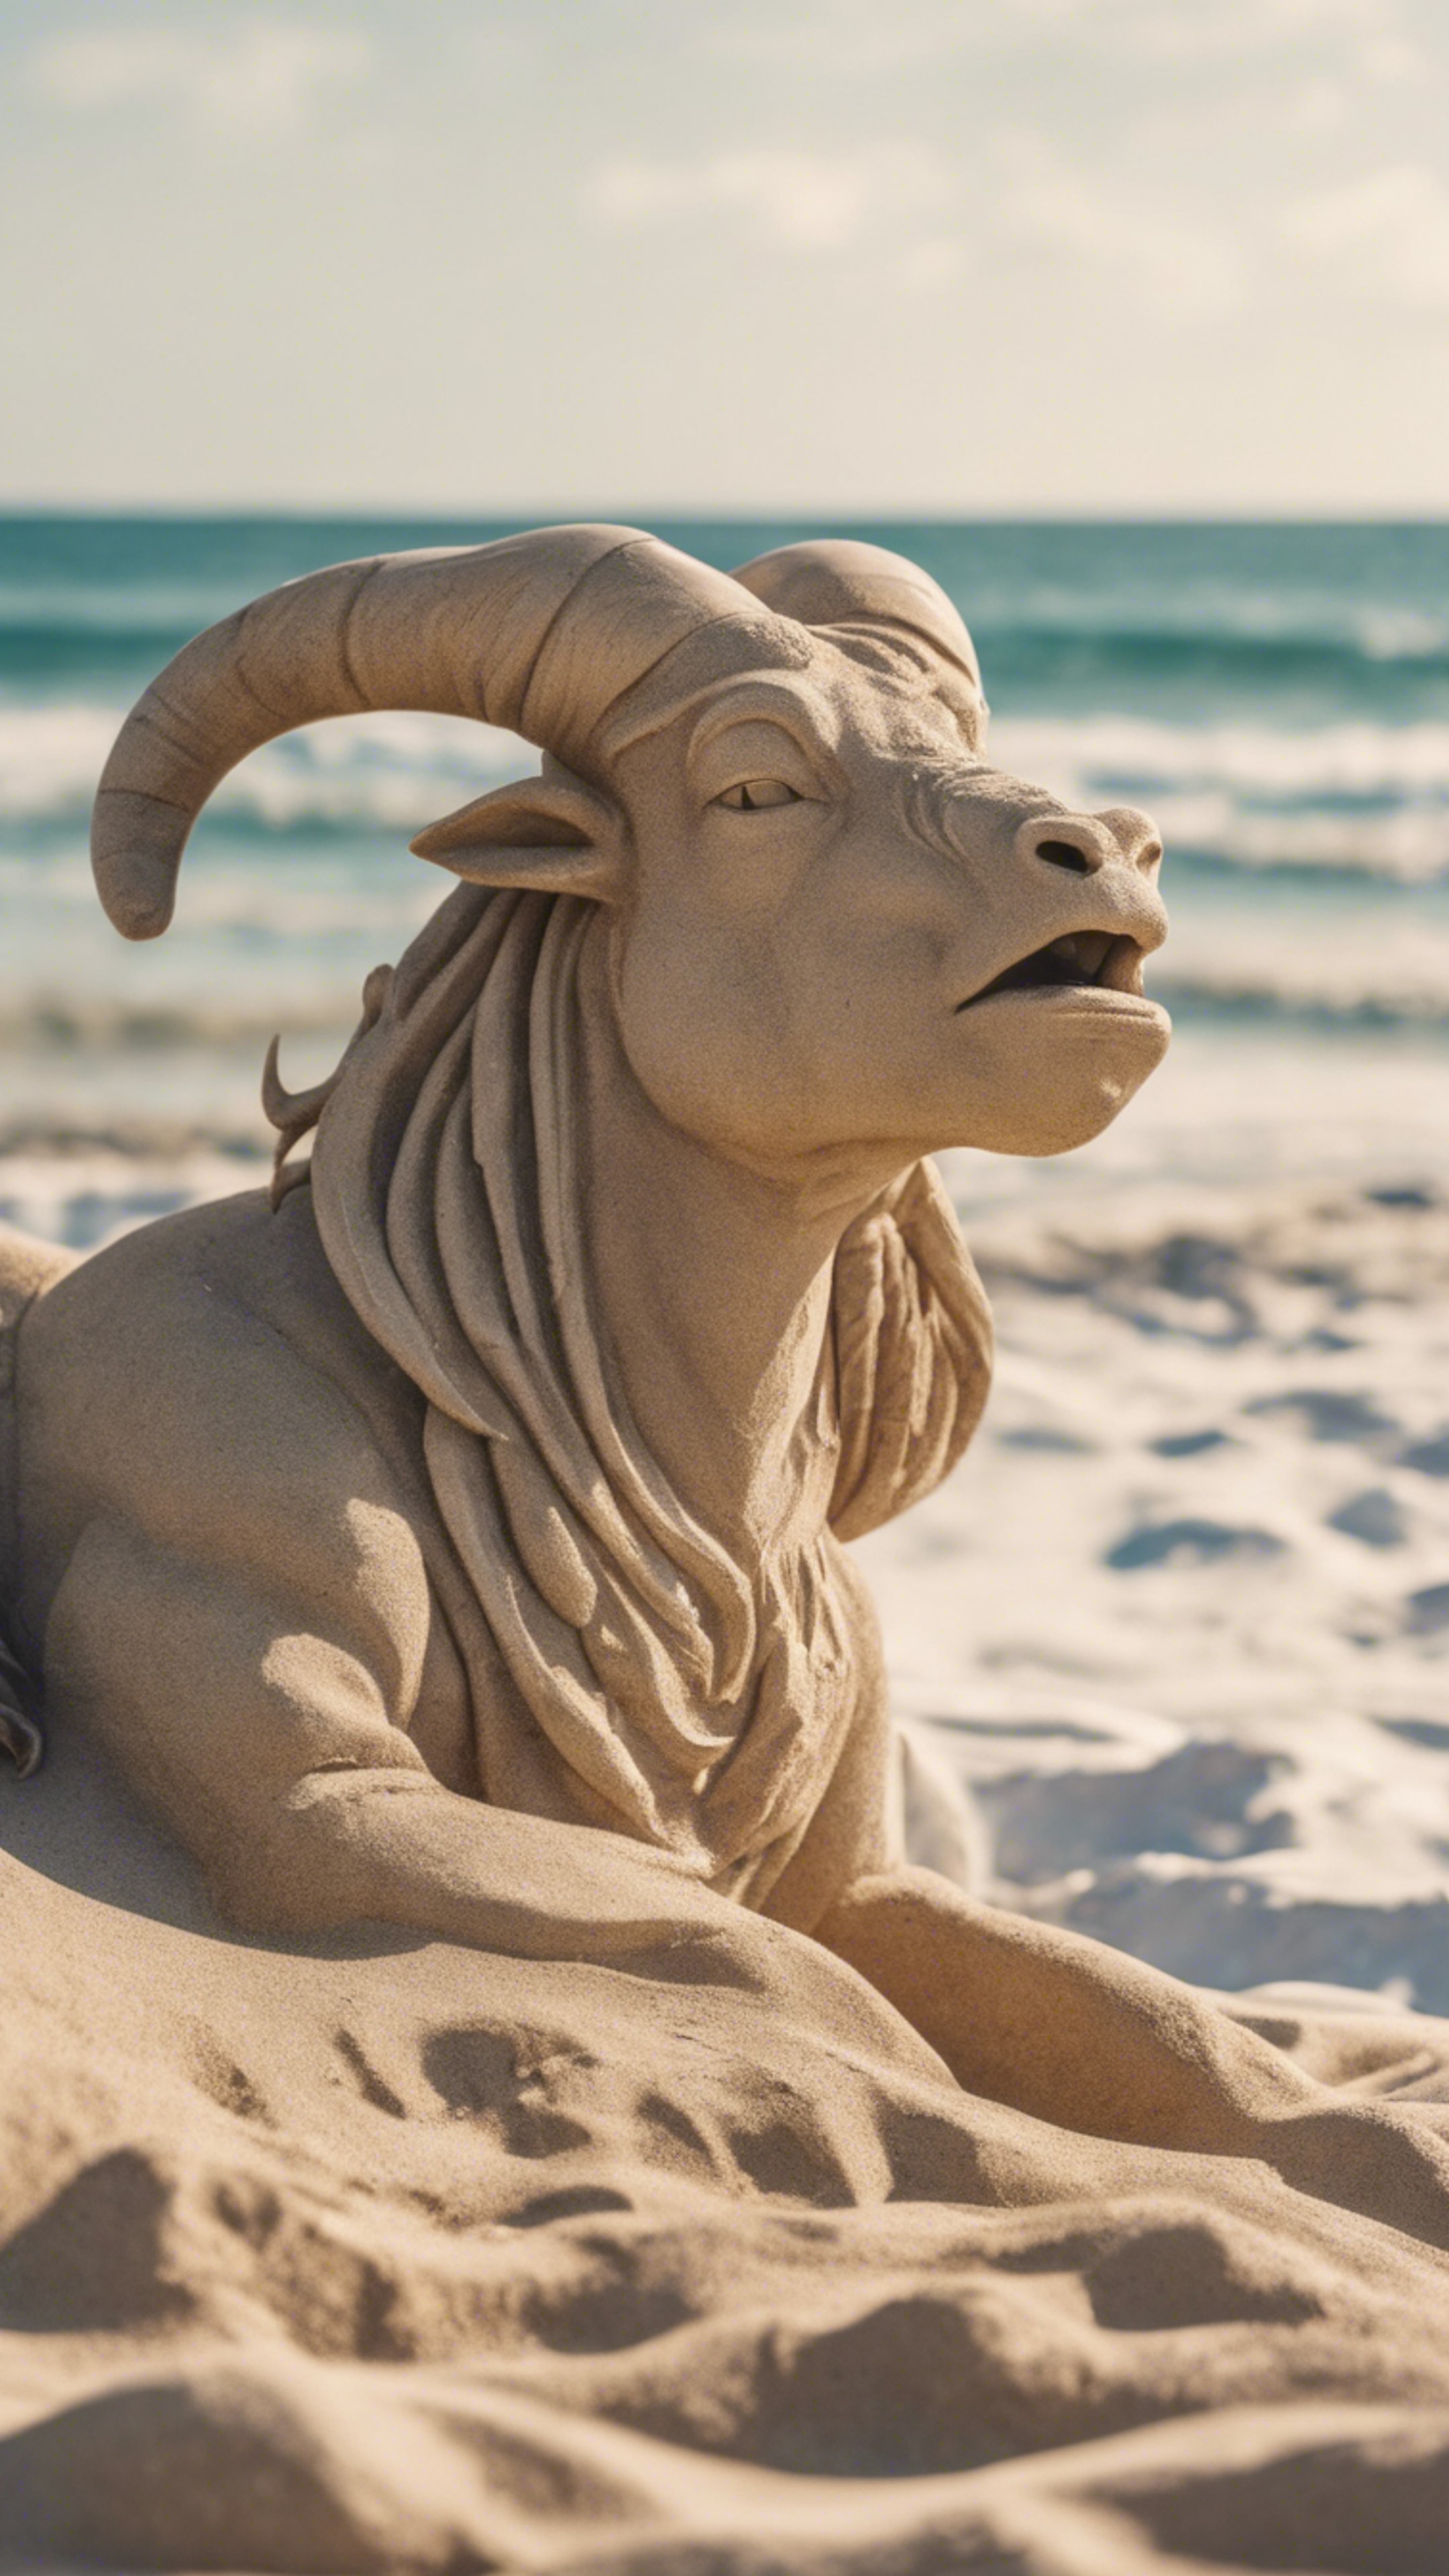 A sandy sculpture of a Capricorn skillfully carved on a busy summer beach.壁紙[dc9e4ec92bb847109240]